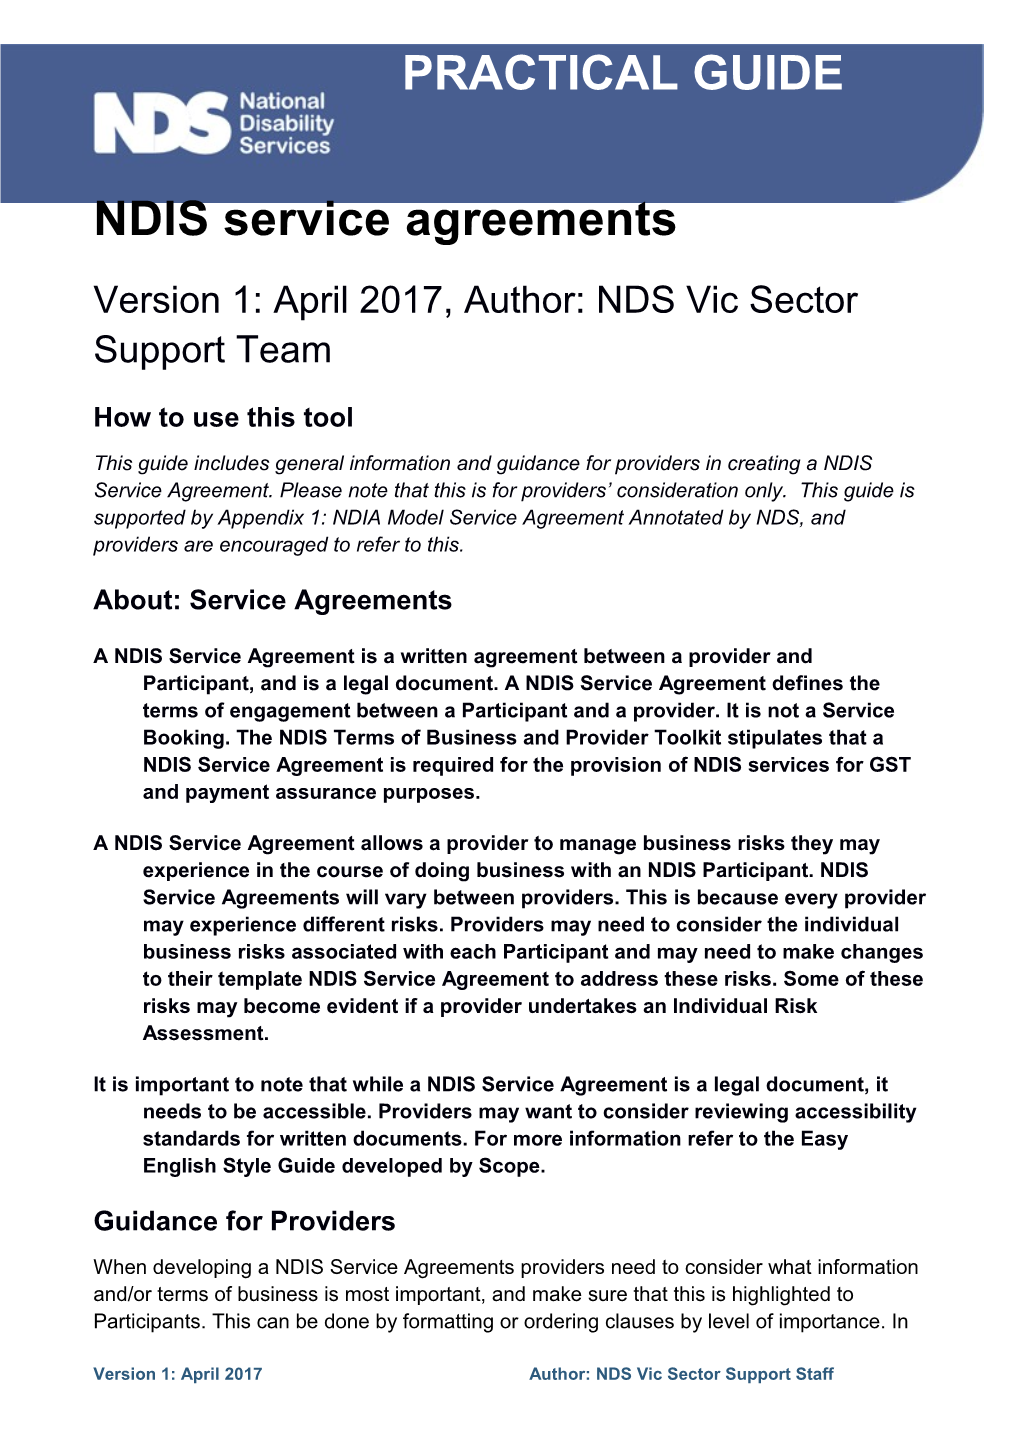 Practical Guide: NDIS Service Agrement